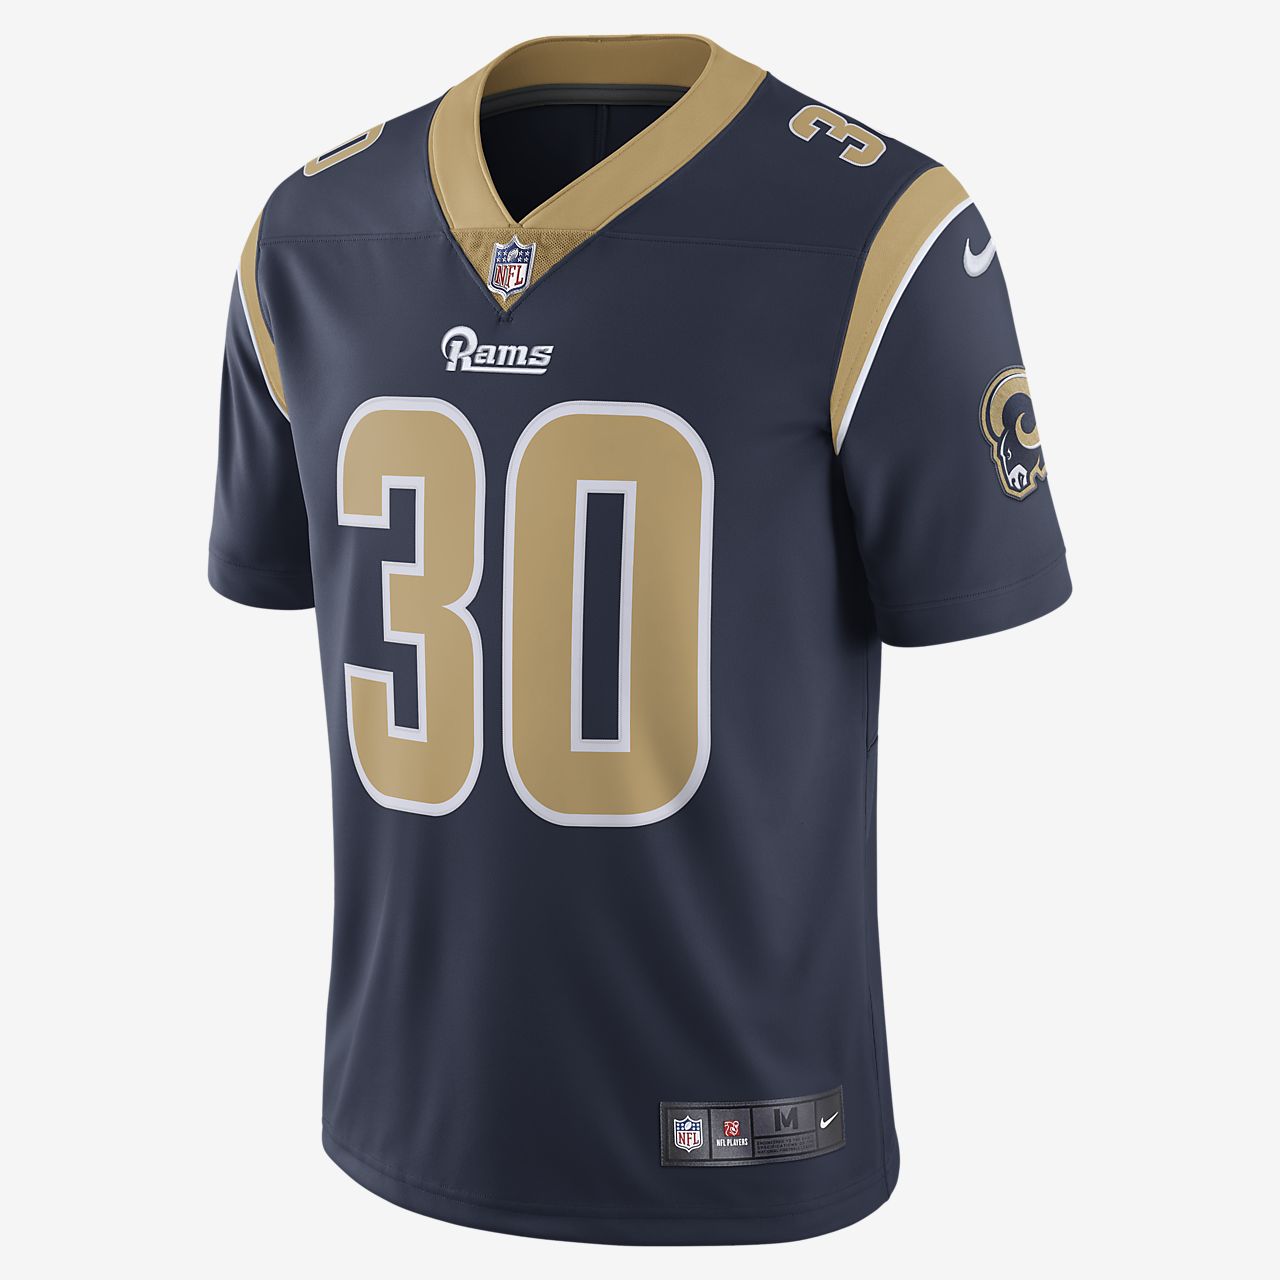 where to buy a rams jersey